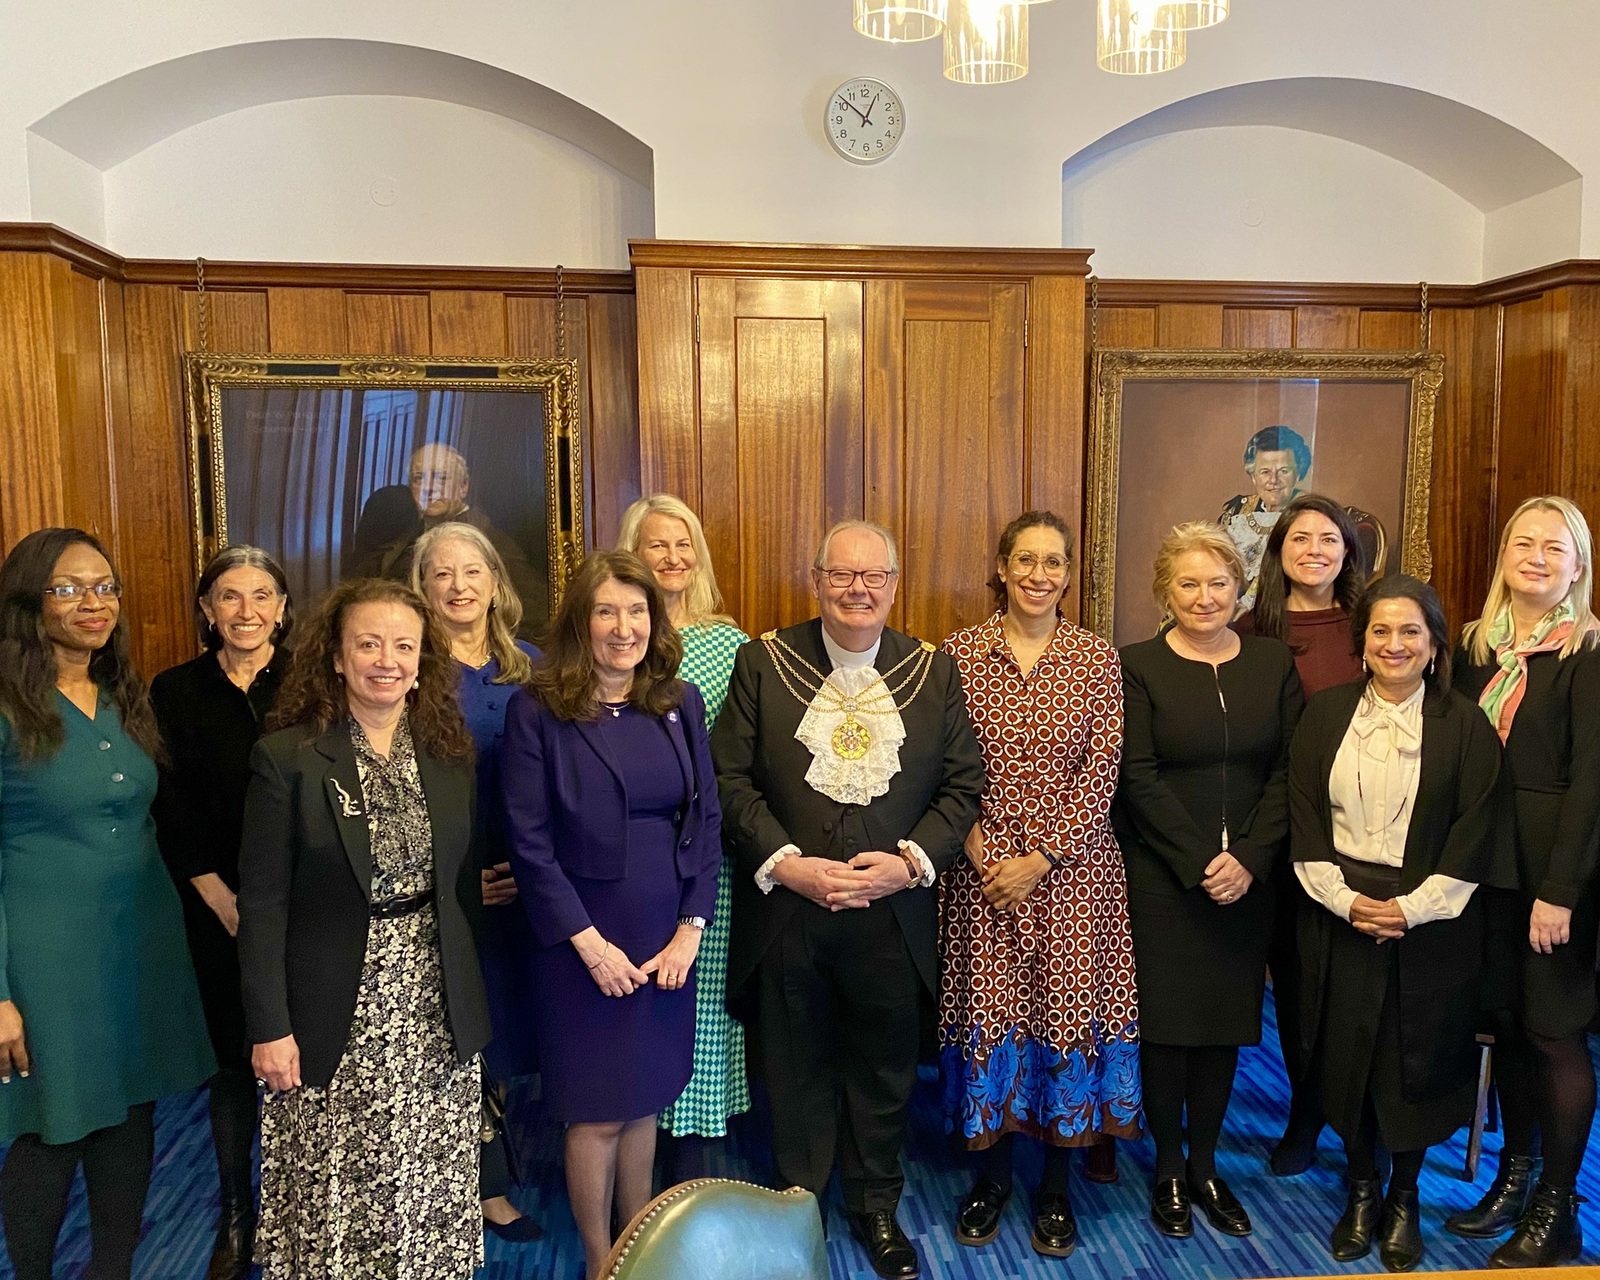 2 Mar 23 – Privileged to host a luncheon to celebrate both International Women’s Day and The UN’s International Day of Women Judges, attended by a dozen extraordinary women of achievement - entrepreneurs, Lady Justices of Appeal, judges, global heads of recruitment, engineers and senior officers of The Corporation - to discuss and reflect on future developments.